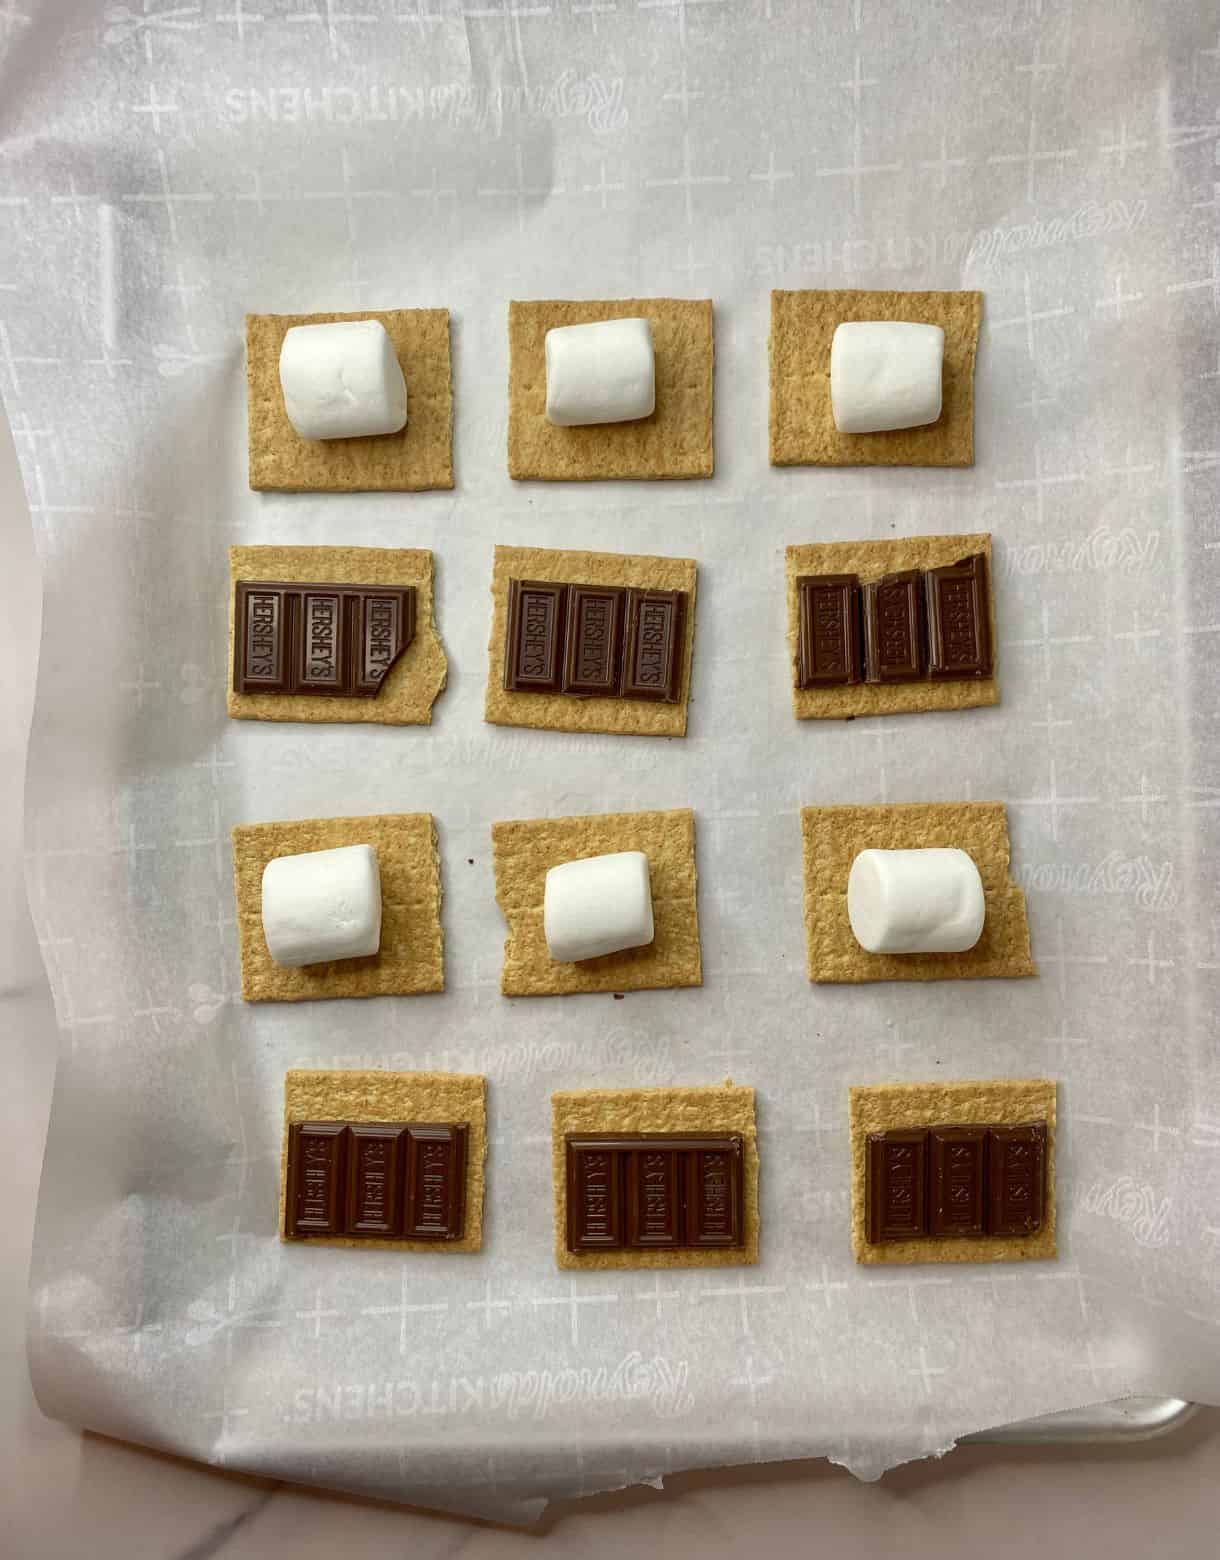 A pan of graham cracker halves, each topped with a piece of chocolate and a marshmallow.